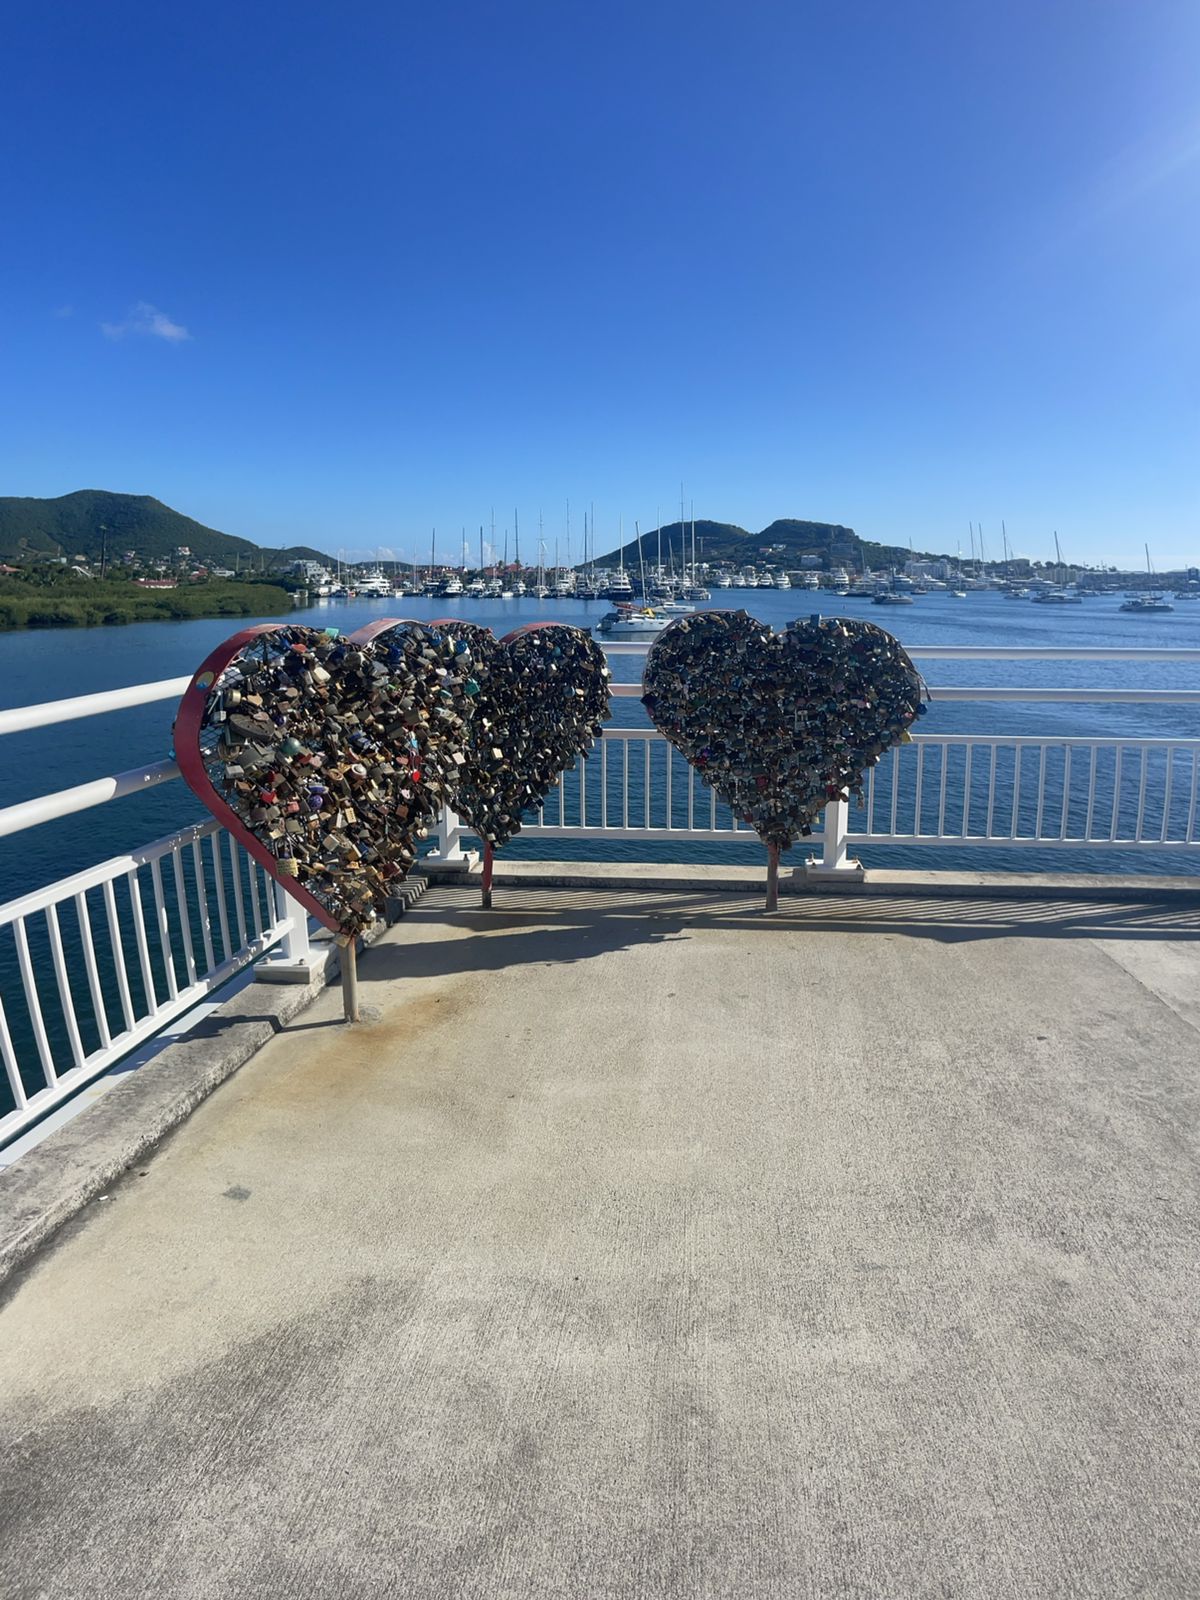 Seal your love while in St. Maarten on the causeway bridge.